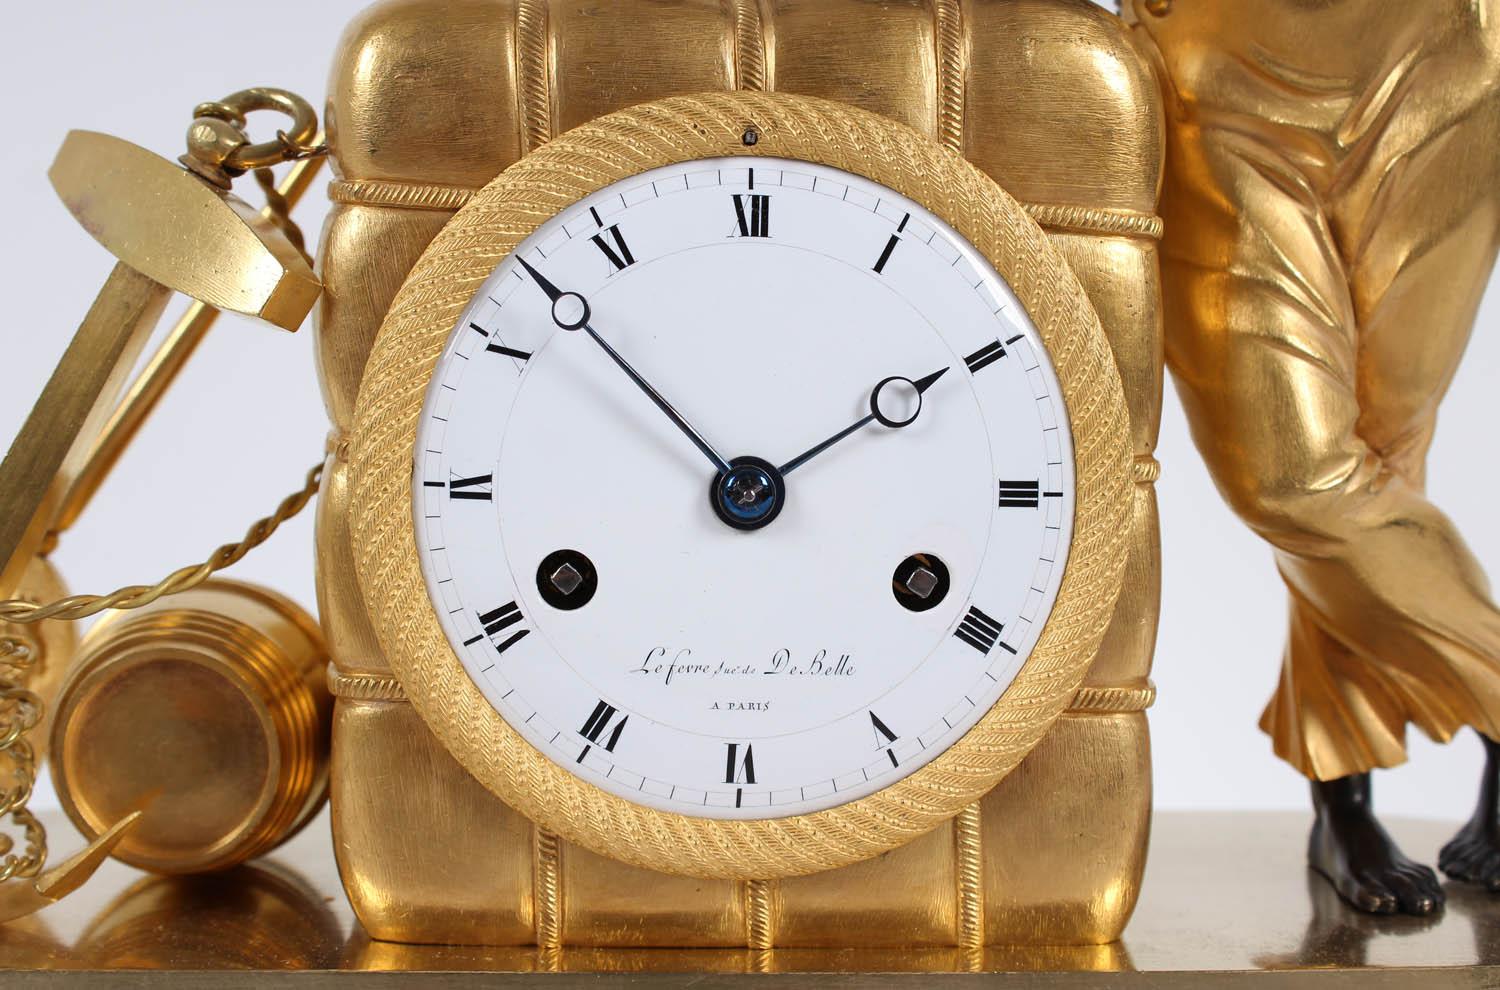 19th century French mantel clock

Paris
Bronze (fire-gilded and patinated), enamel
Empire circa 1810

Dimensions: H x W x D: 37 x 30 x 11 cm


Eight-day movement with lock disk and thread suspension.
Strike on bell at the half and full